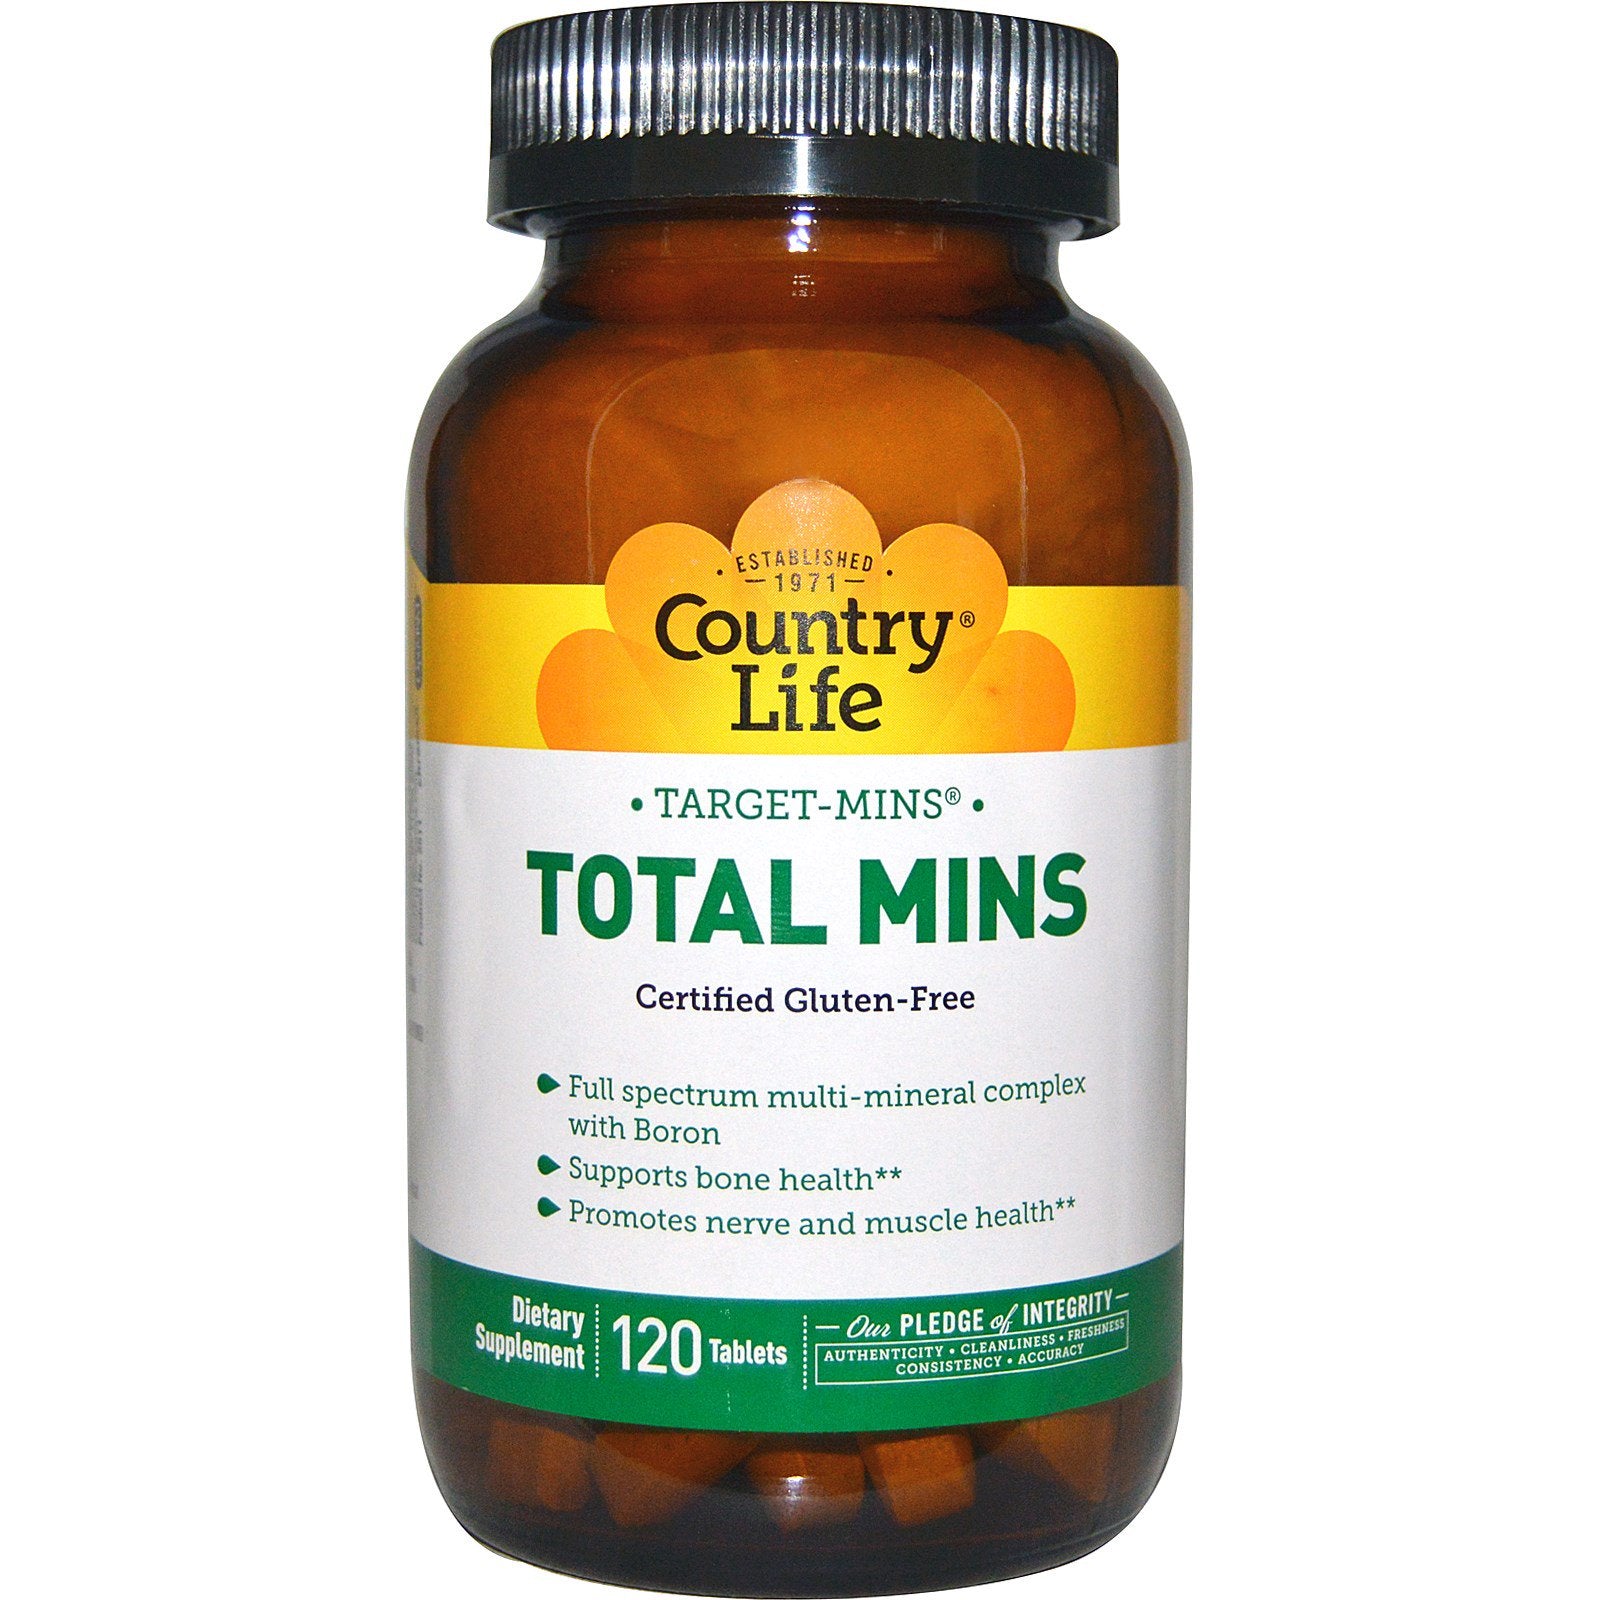 Country Life, Target-Mins Total Mins, 120 Tablets